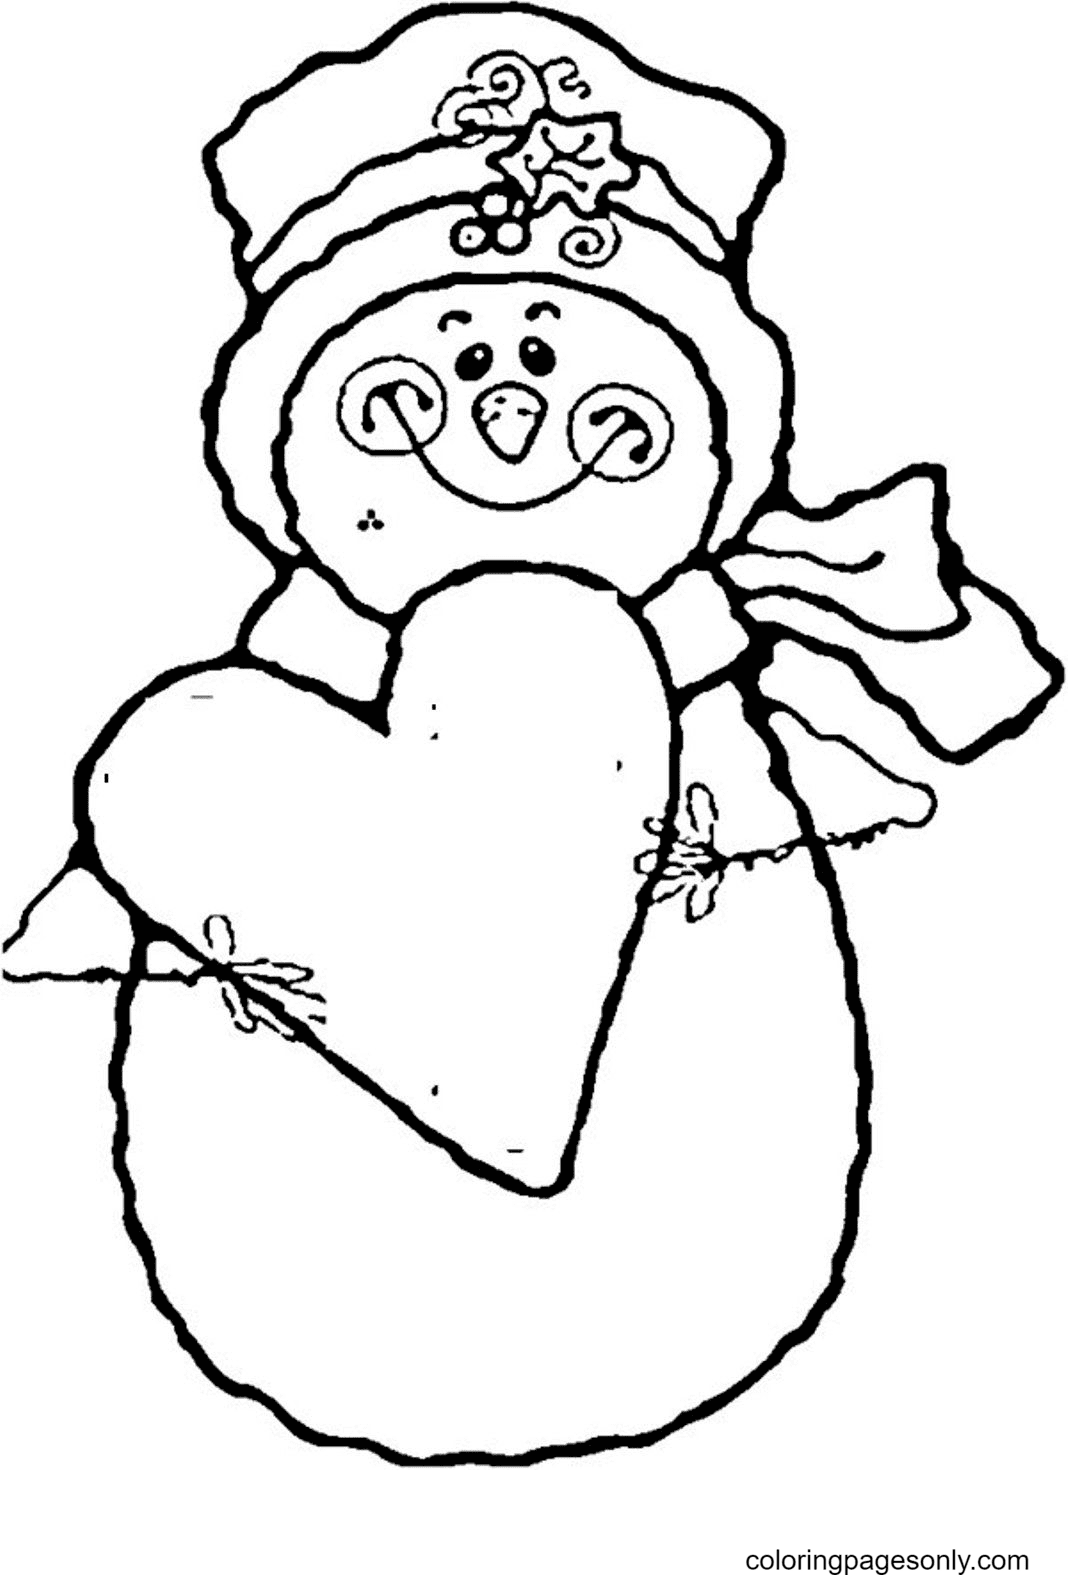 Snowman Holding a Heart Coloring Page